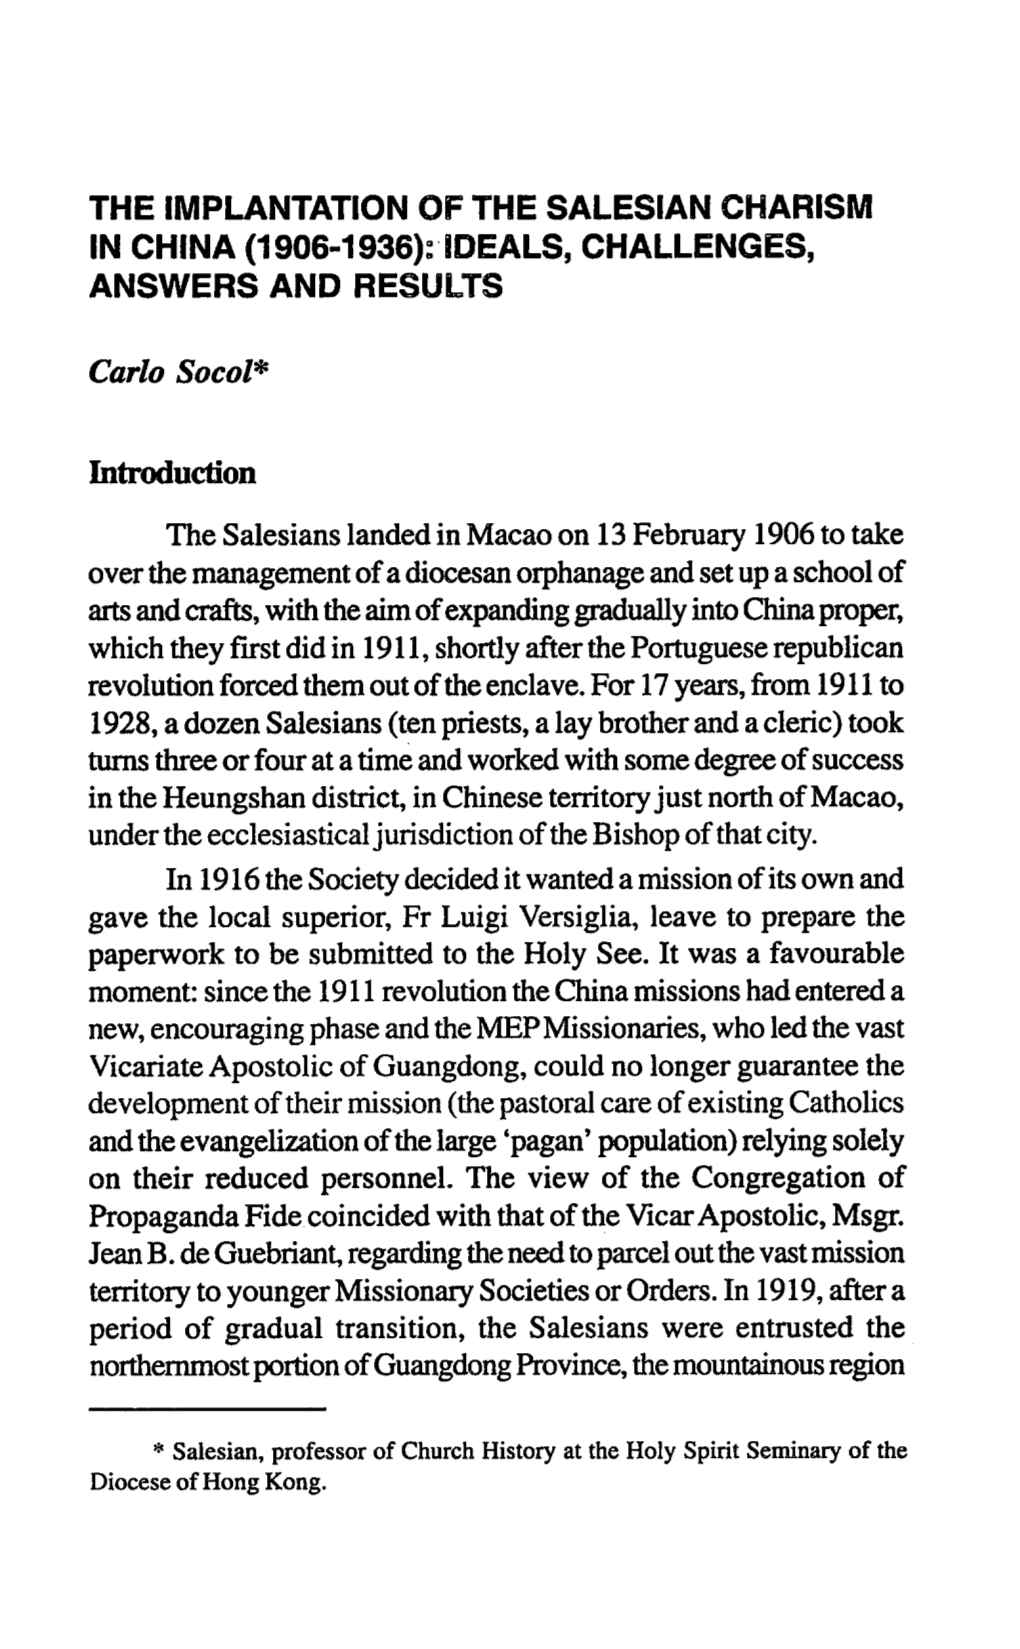 THE IMPLANTATION of the SALESIAN CHAHISM Ln CHINA (1906-1936): IDEALS, CHALLENGES, ANSWERS and RESULTS Carlo Socol*